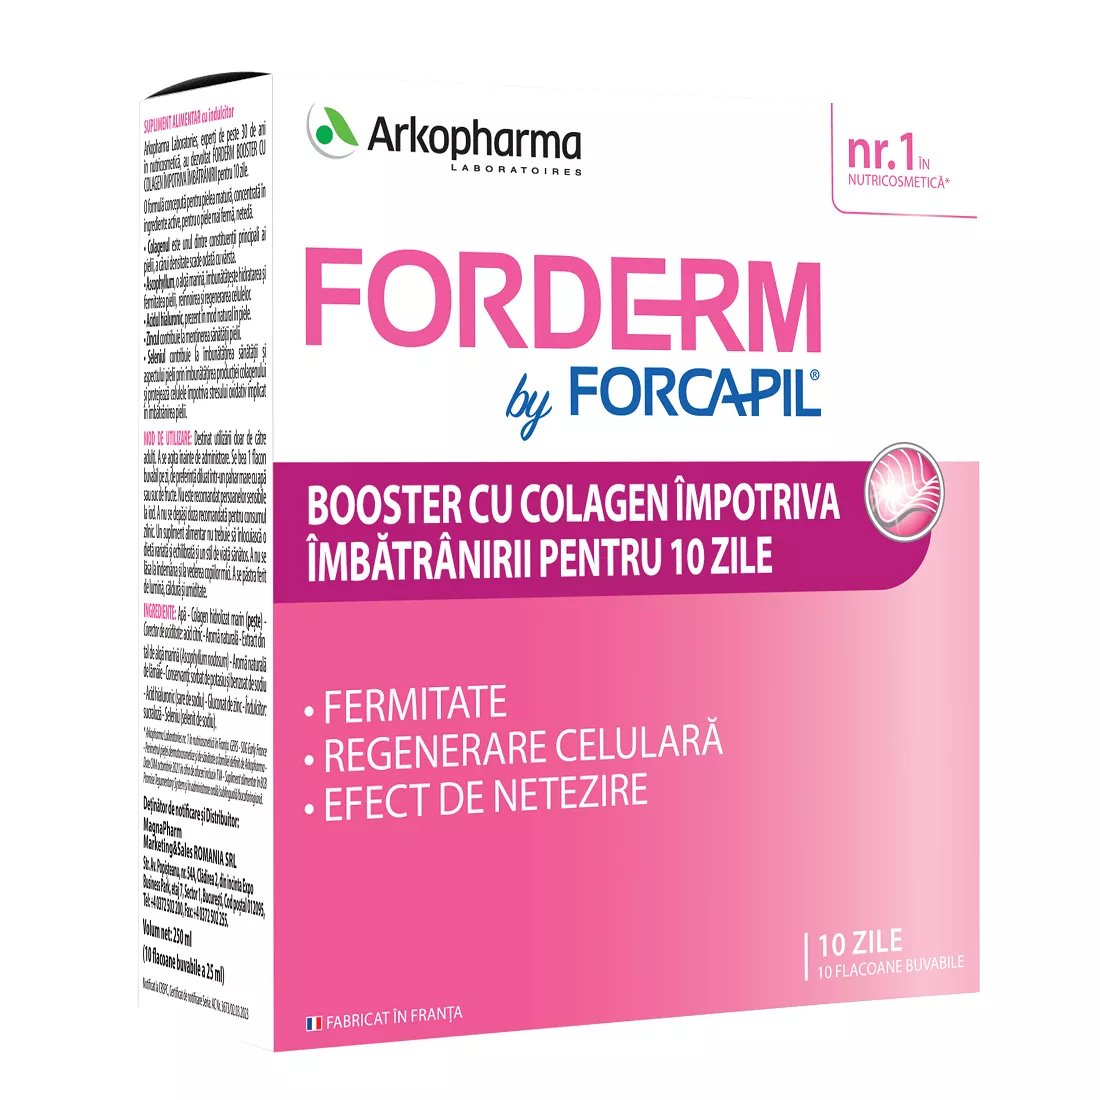 Booster cu colagen Forderm by Forcapil, 10 fiole, Arkopharma, [],nordpharm.ro